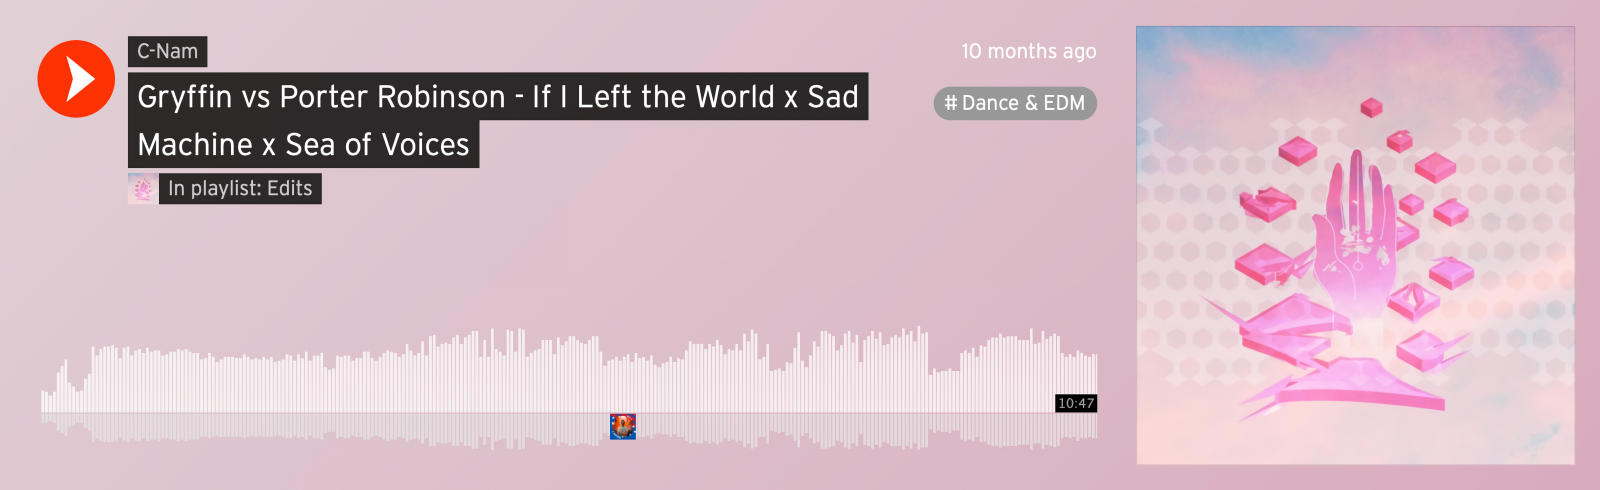 Illustration for article titled Gryffin vs Porter Robinson - If I Left the World x Sad Machine (Special Remake)